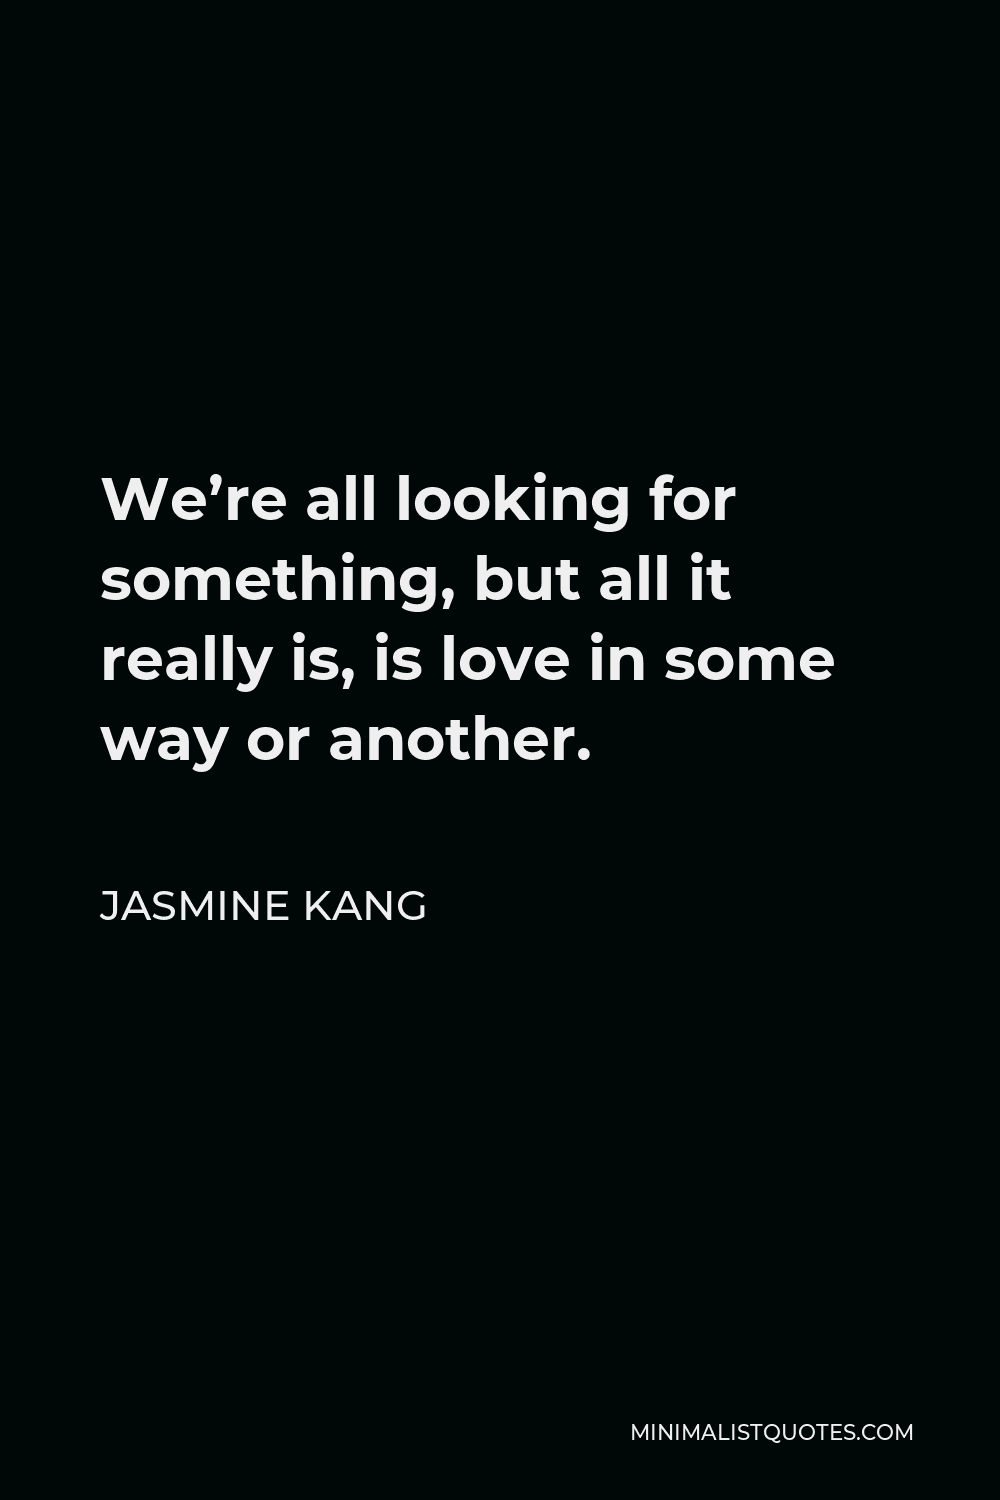 Jasmine Kang Quote - We’re all looking for something, but all it really is, is love in some way or another.